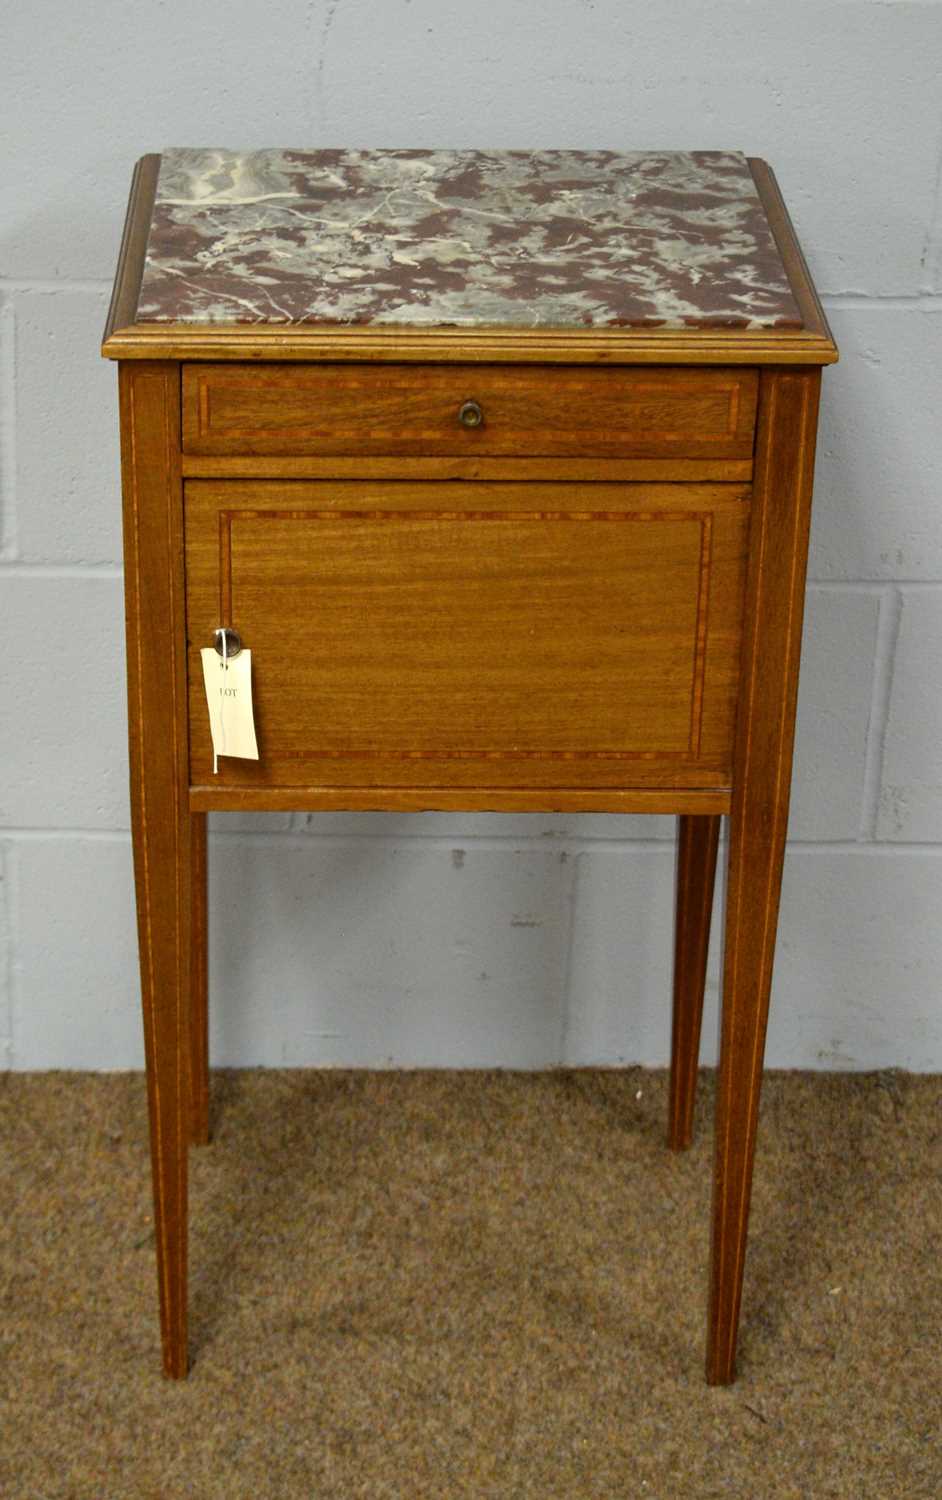 An early 20th C French mahogany and marble top pot cupboard.